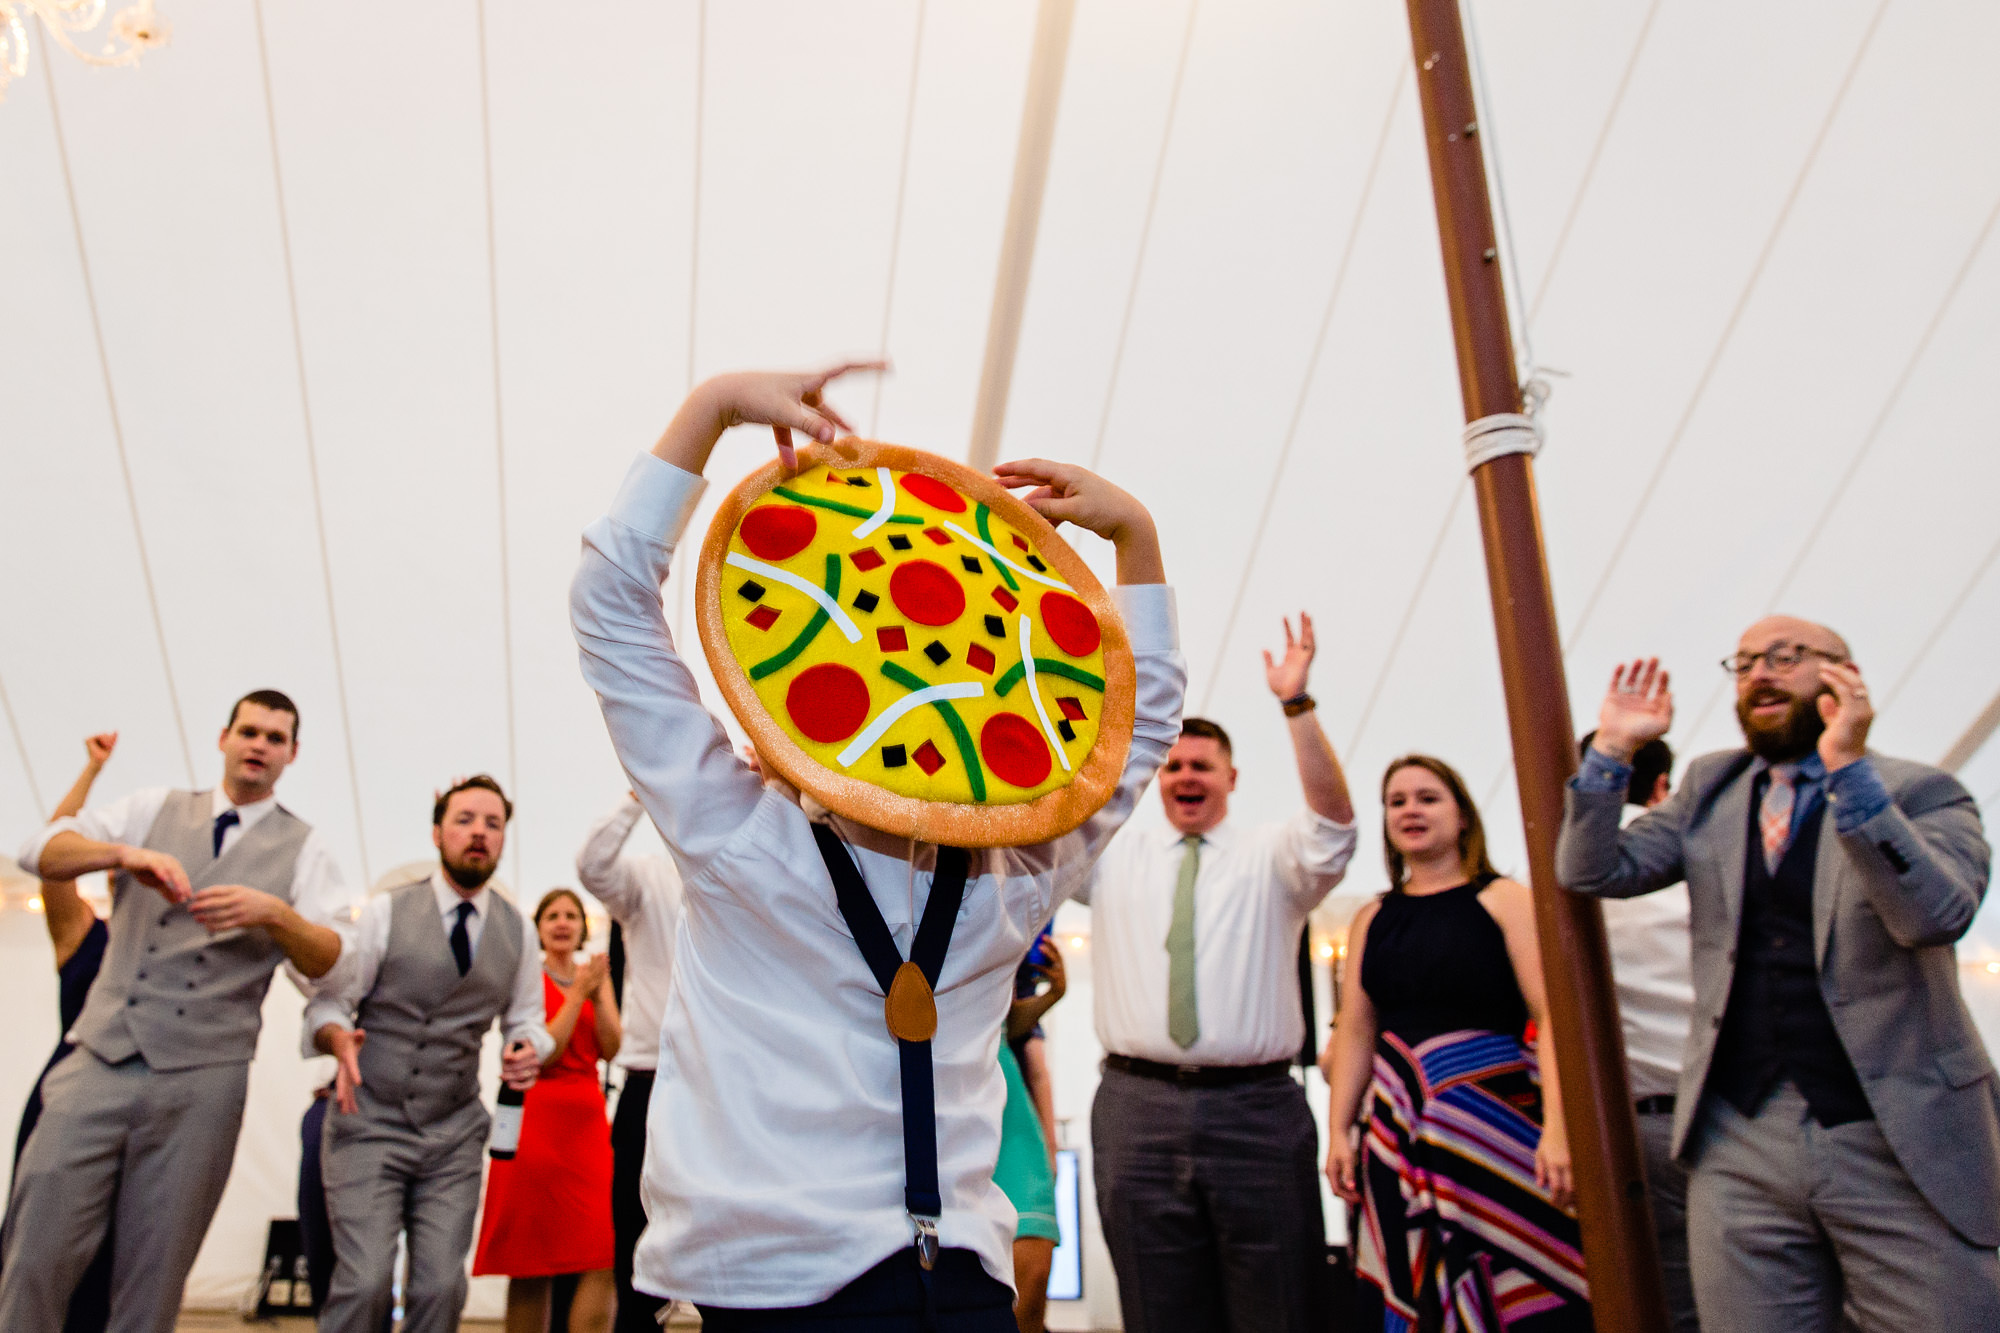 A fun and dance-filled wedding reception at French's Point in Maine